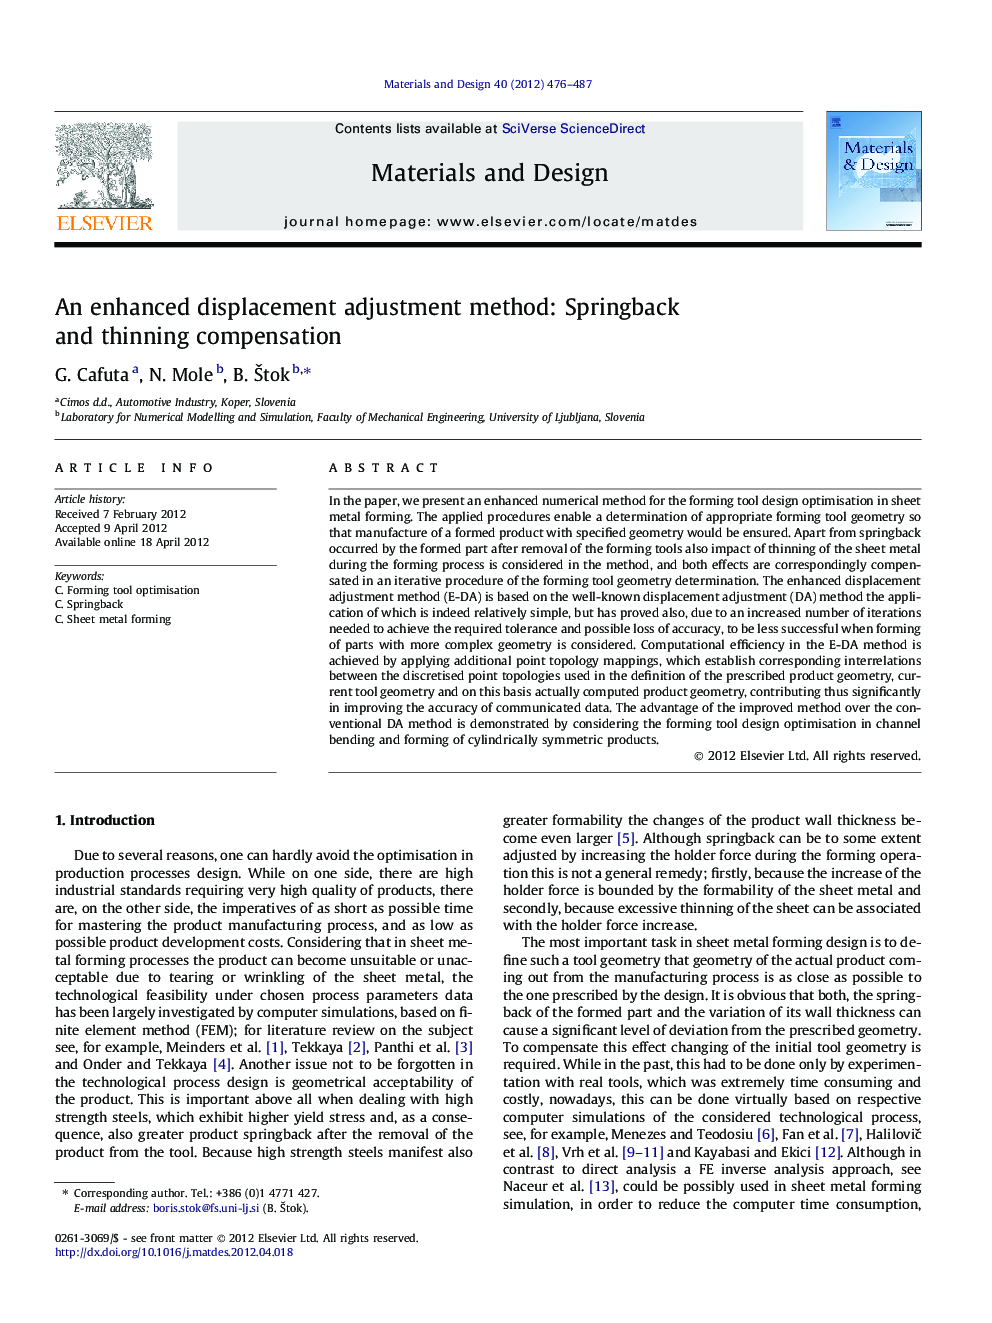 An enhanced displacement adjustment method: Springback and thinning compensation